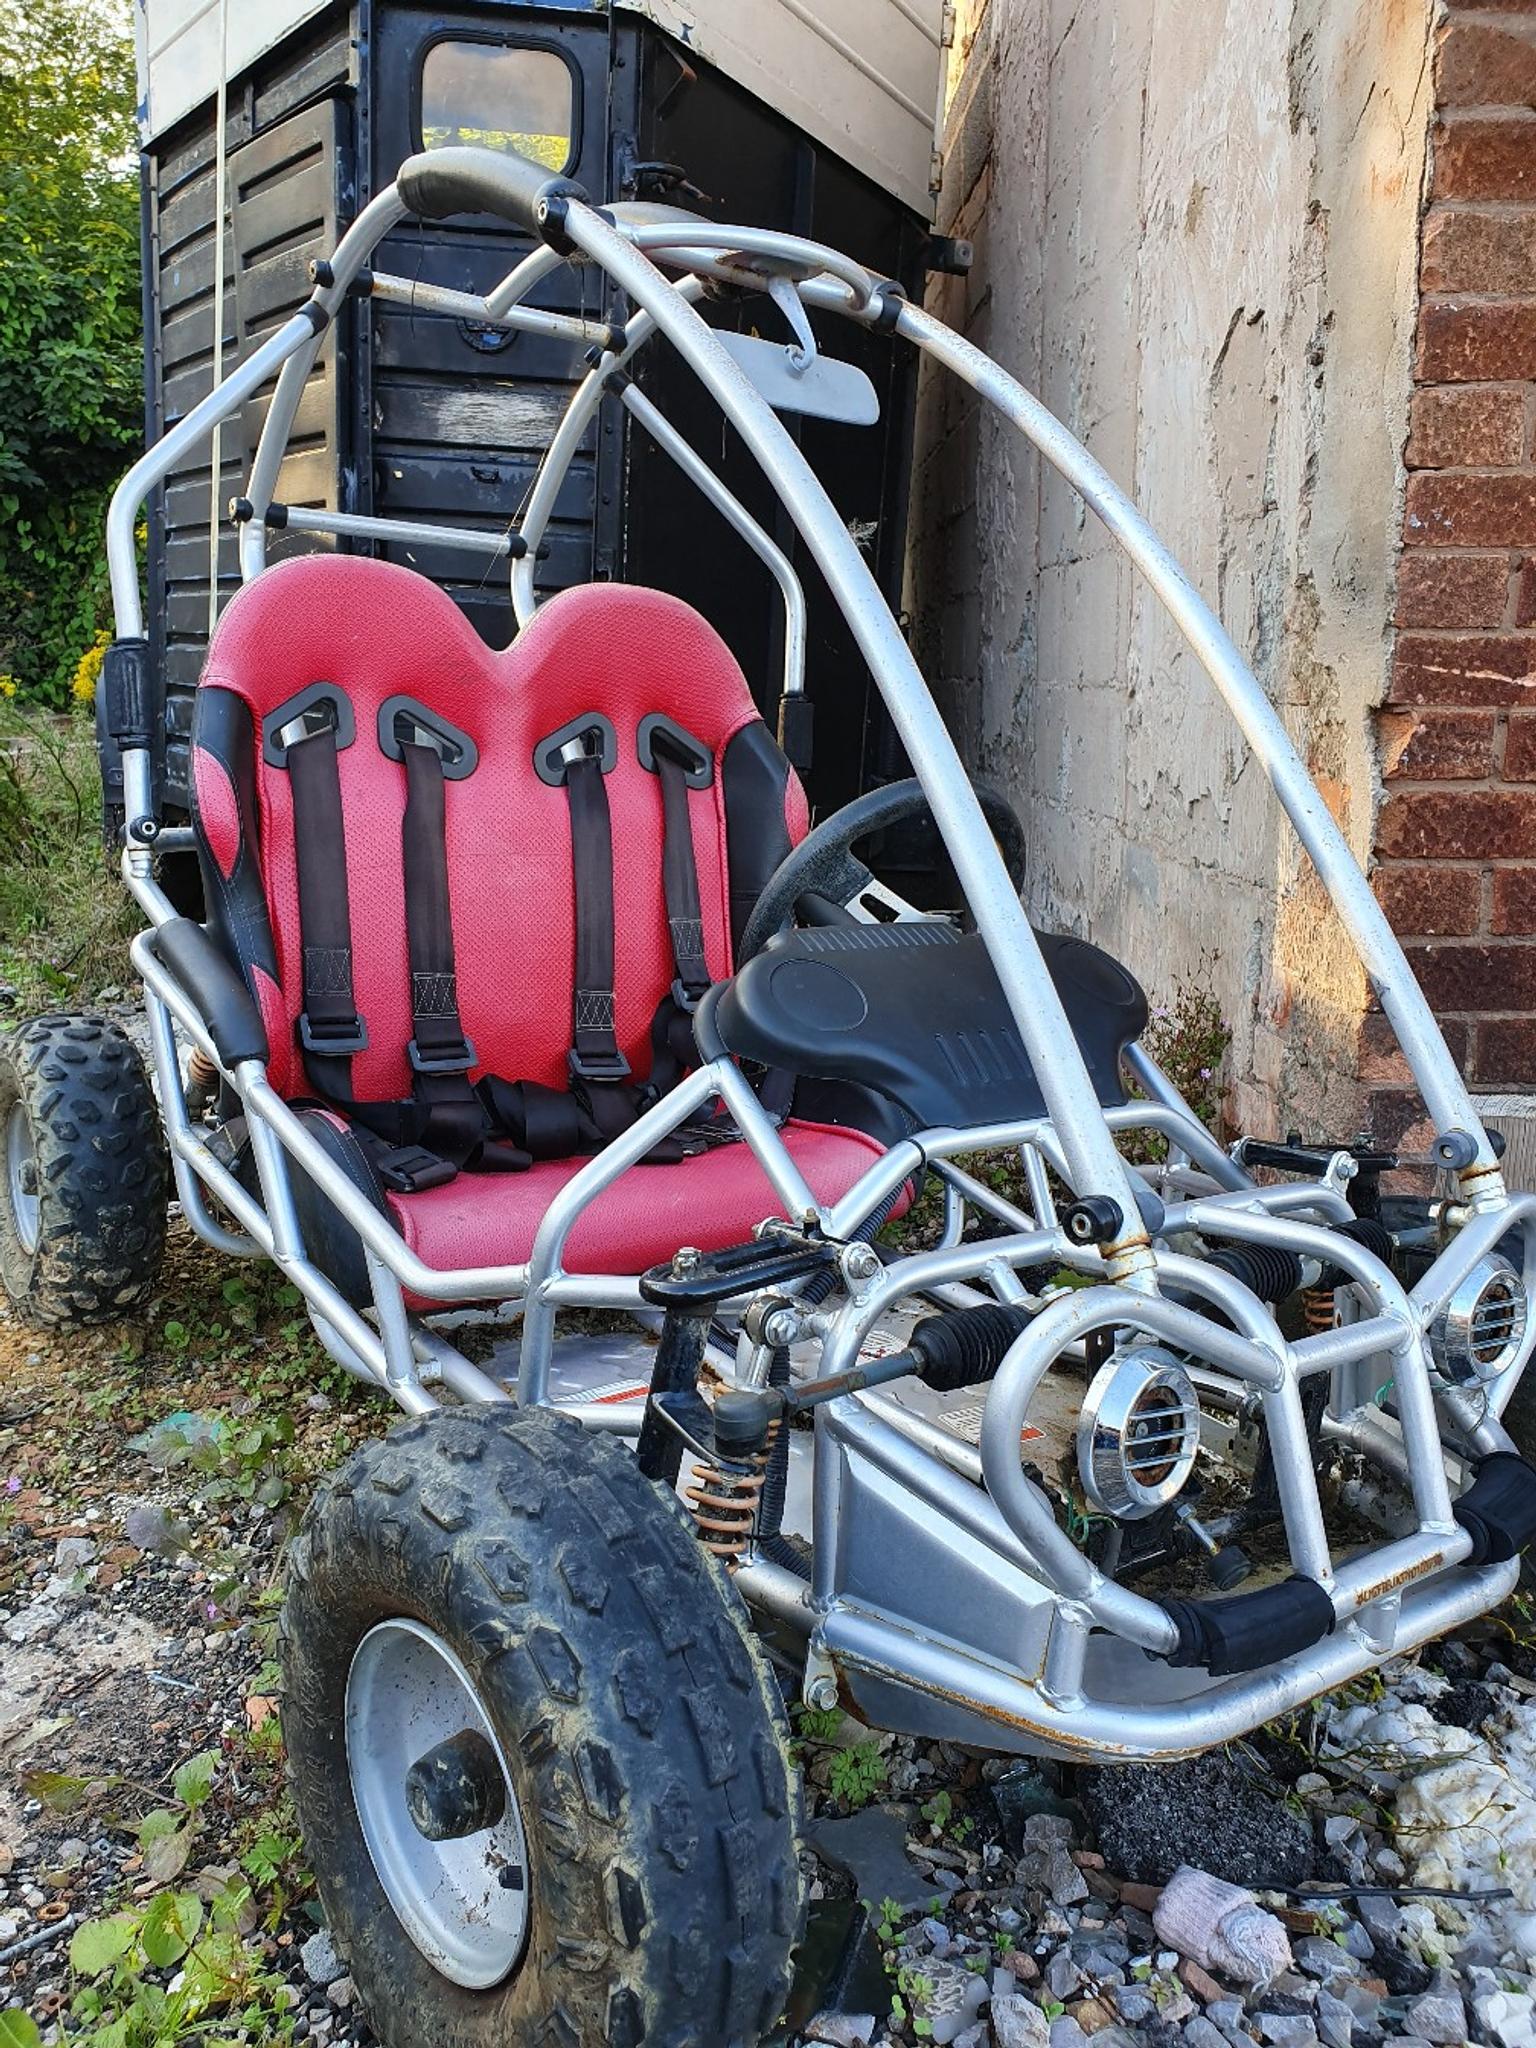 petrol buggy for sale